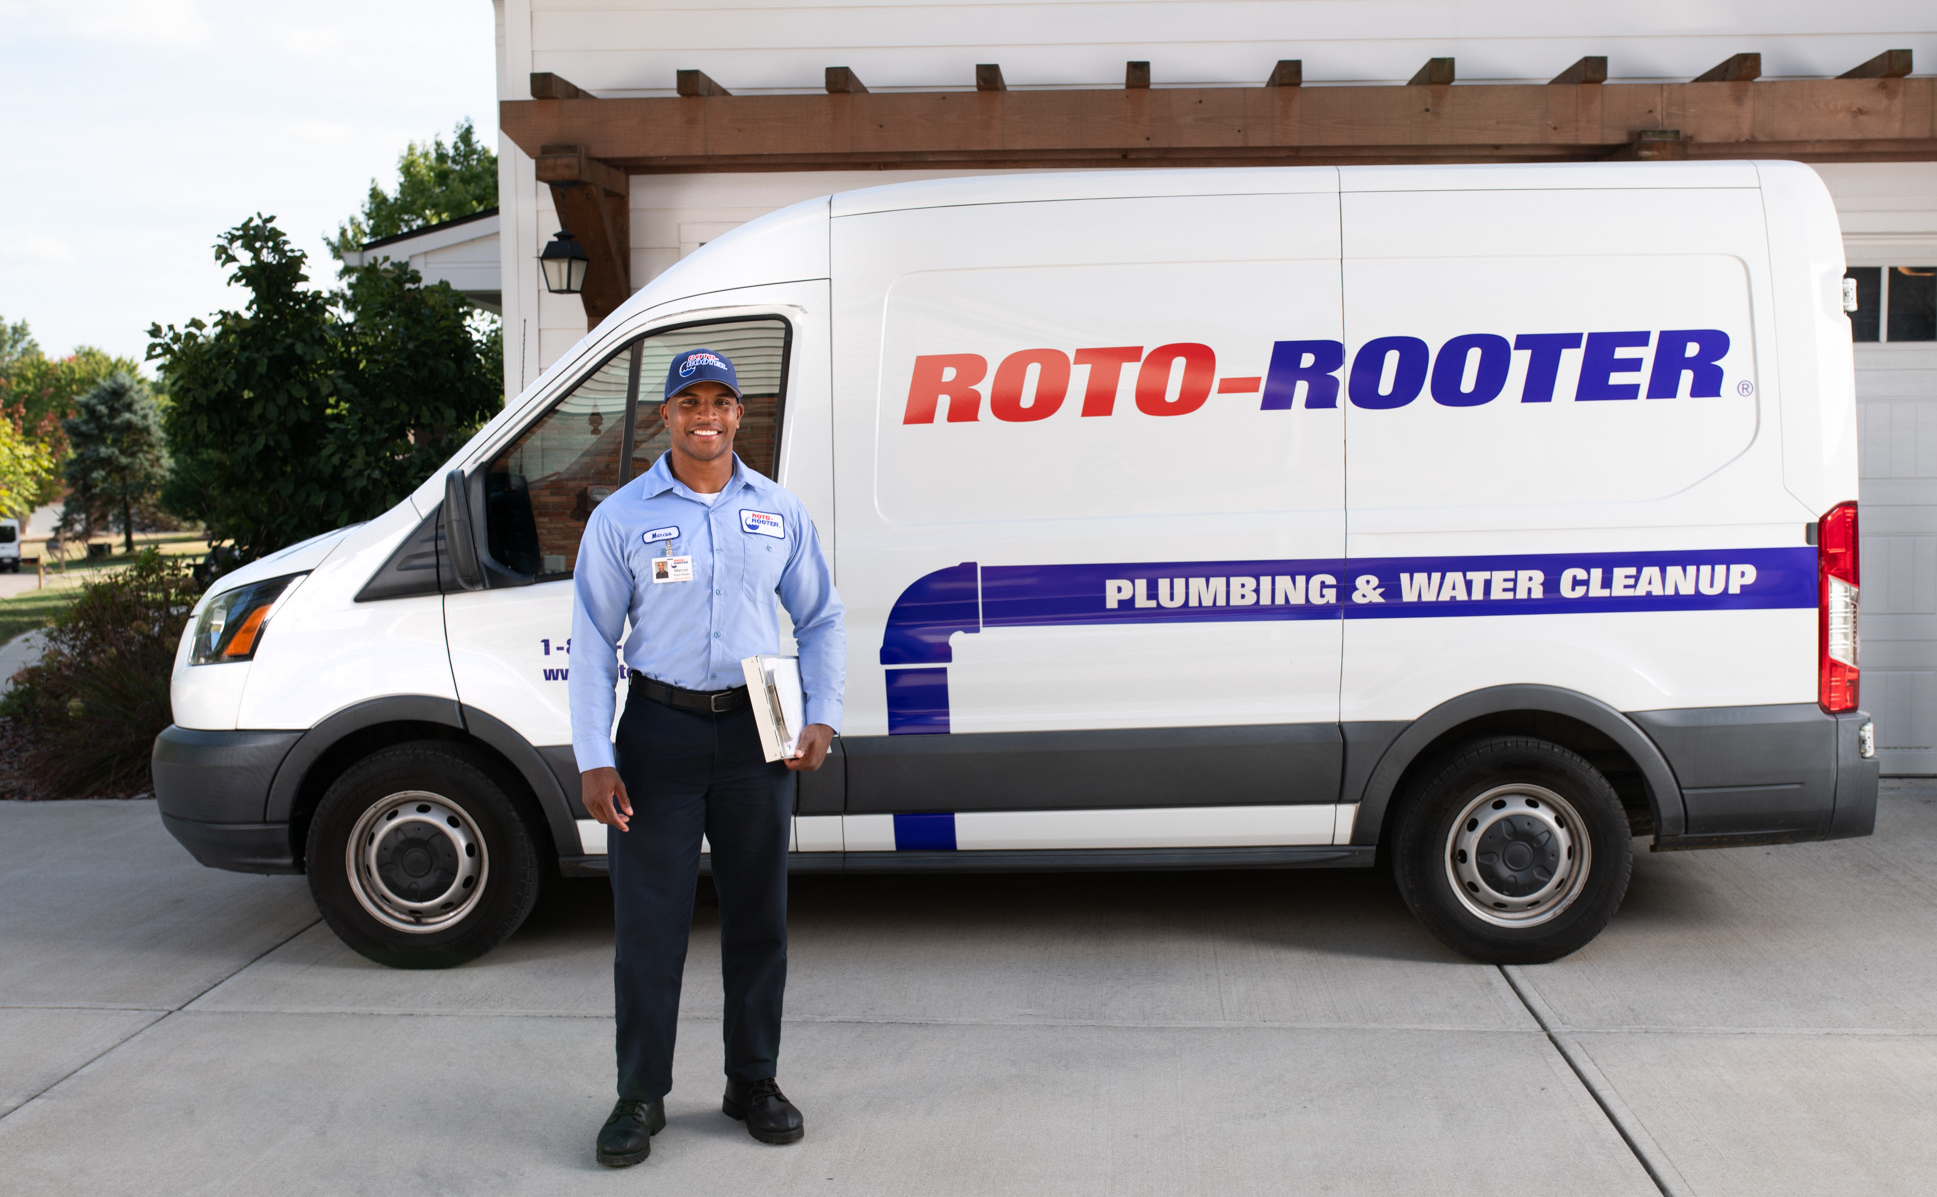 Roto-Rooter Plumbing & Water Cleanup 27 N Main St #2, Marlboro New Jersey 07746